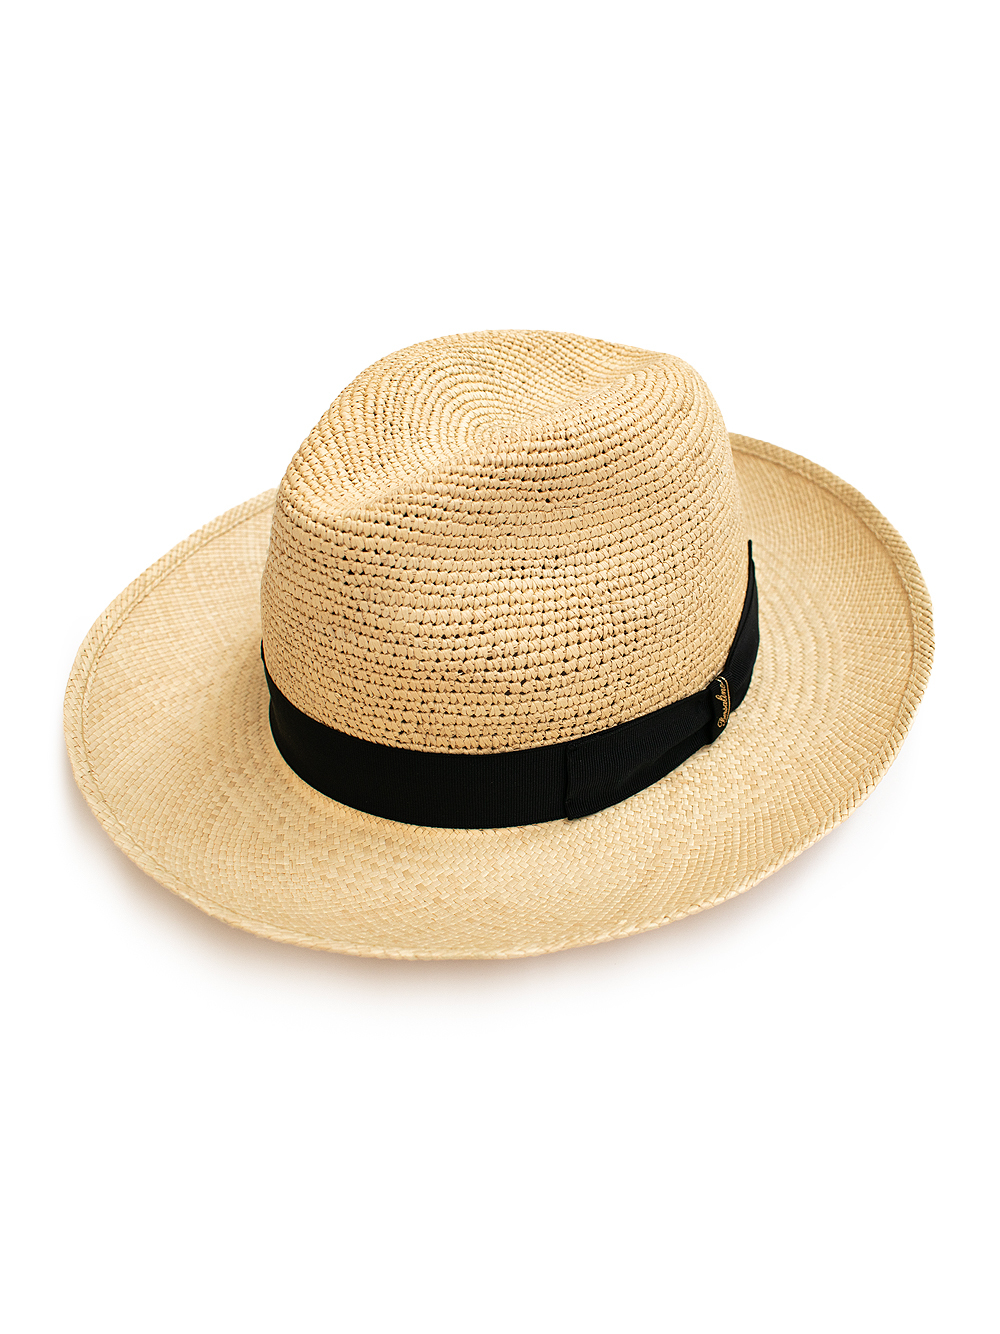 Borsalino X Tessabit BORSALINO X TESSABIT- Tessabit Special Edition Panama Hat